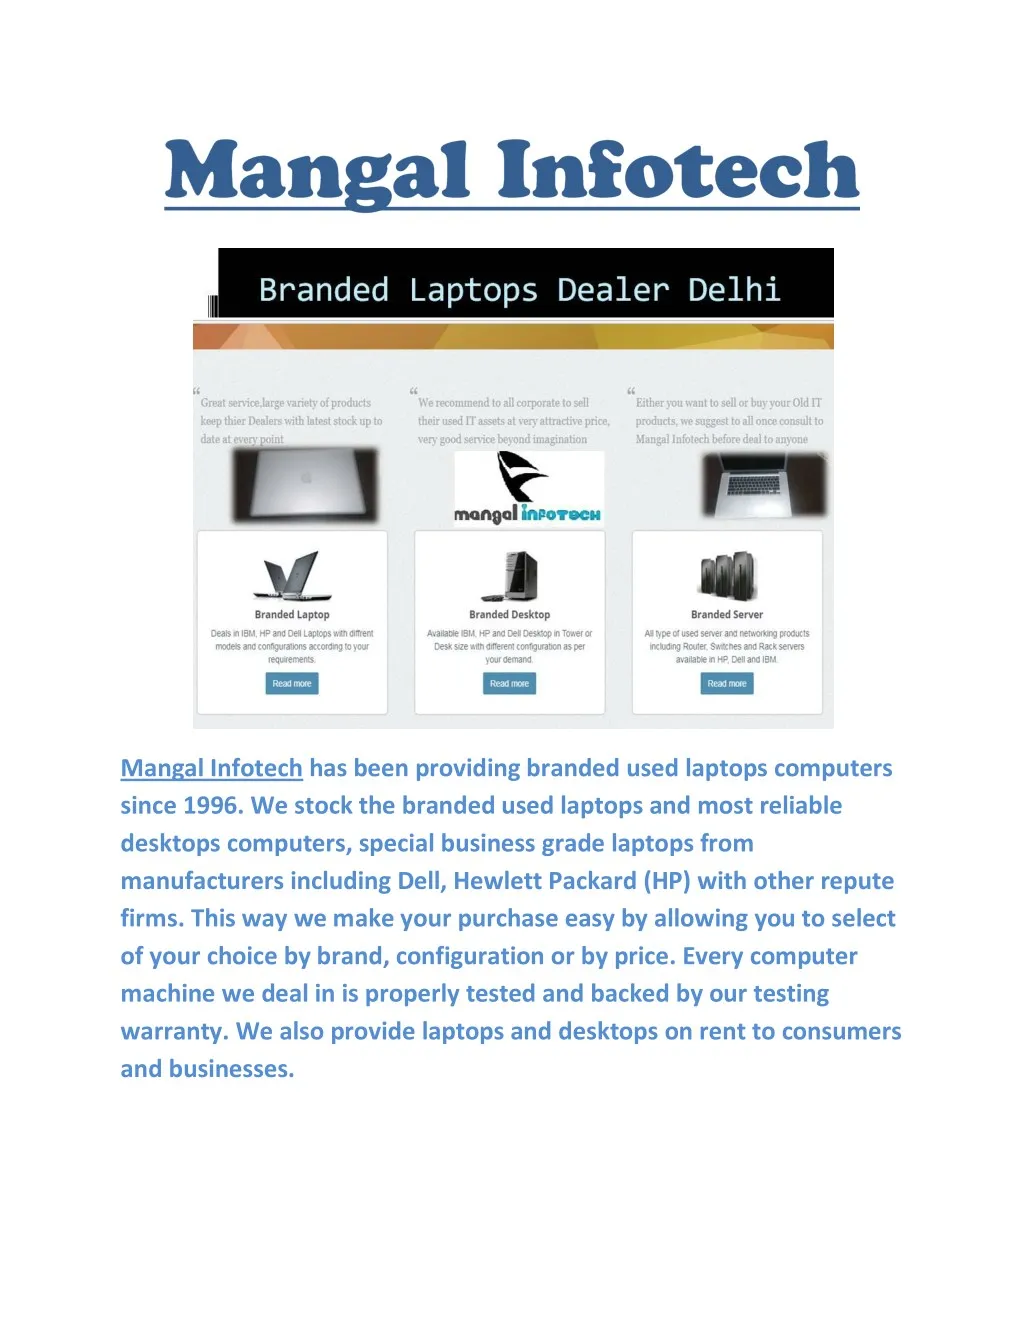 mangal infotech has been providing branded used